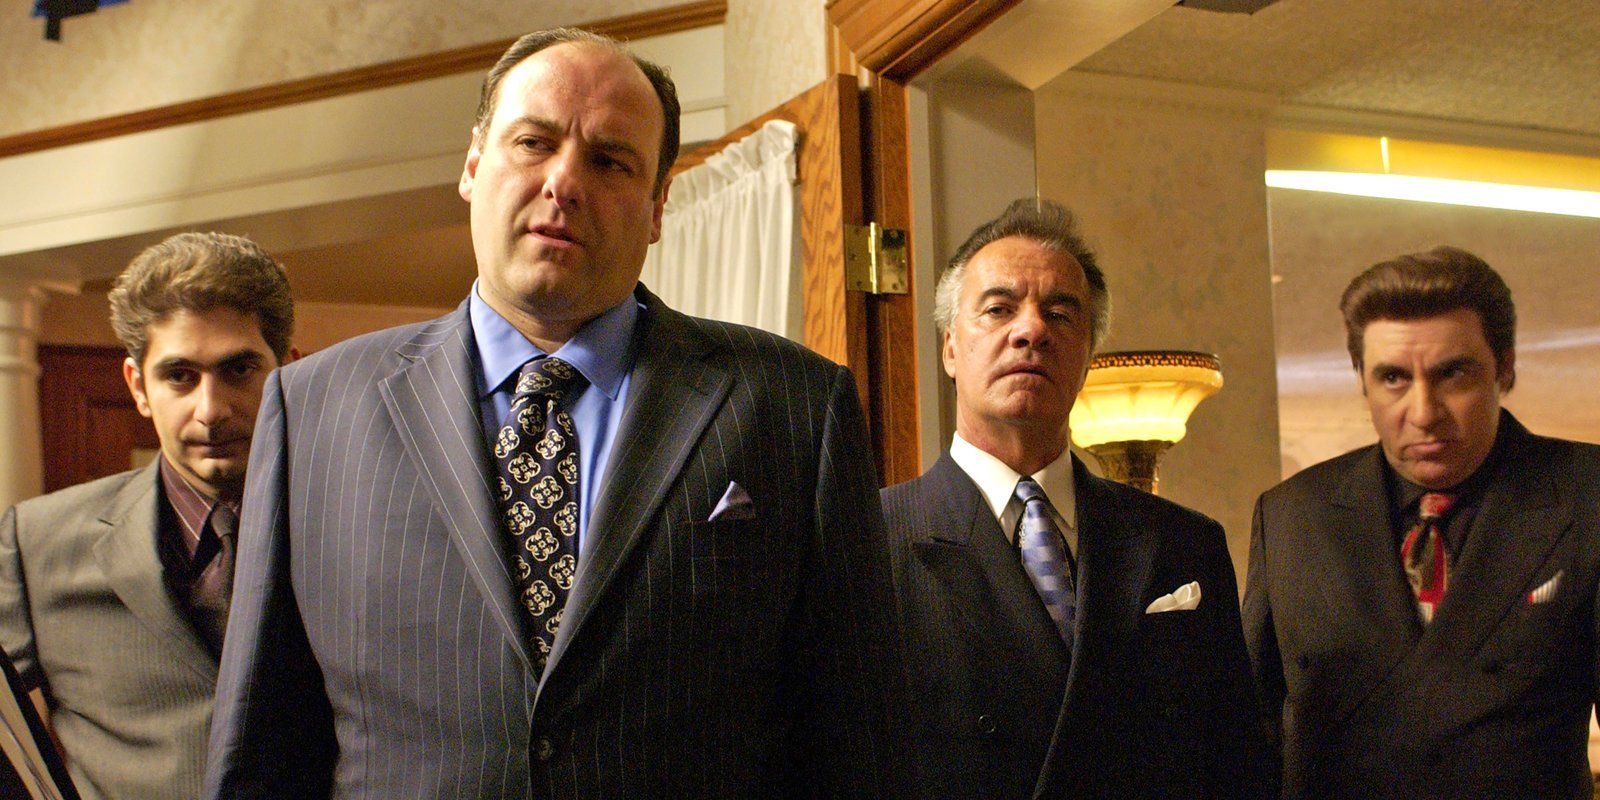 5 Things The Sopranos Did Better Than The Wire (And 5 The Wire Did Better)